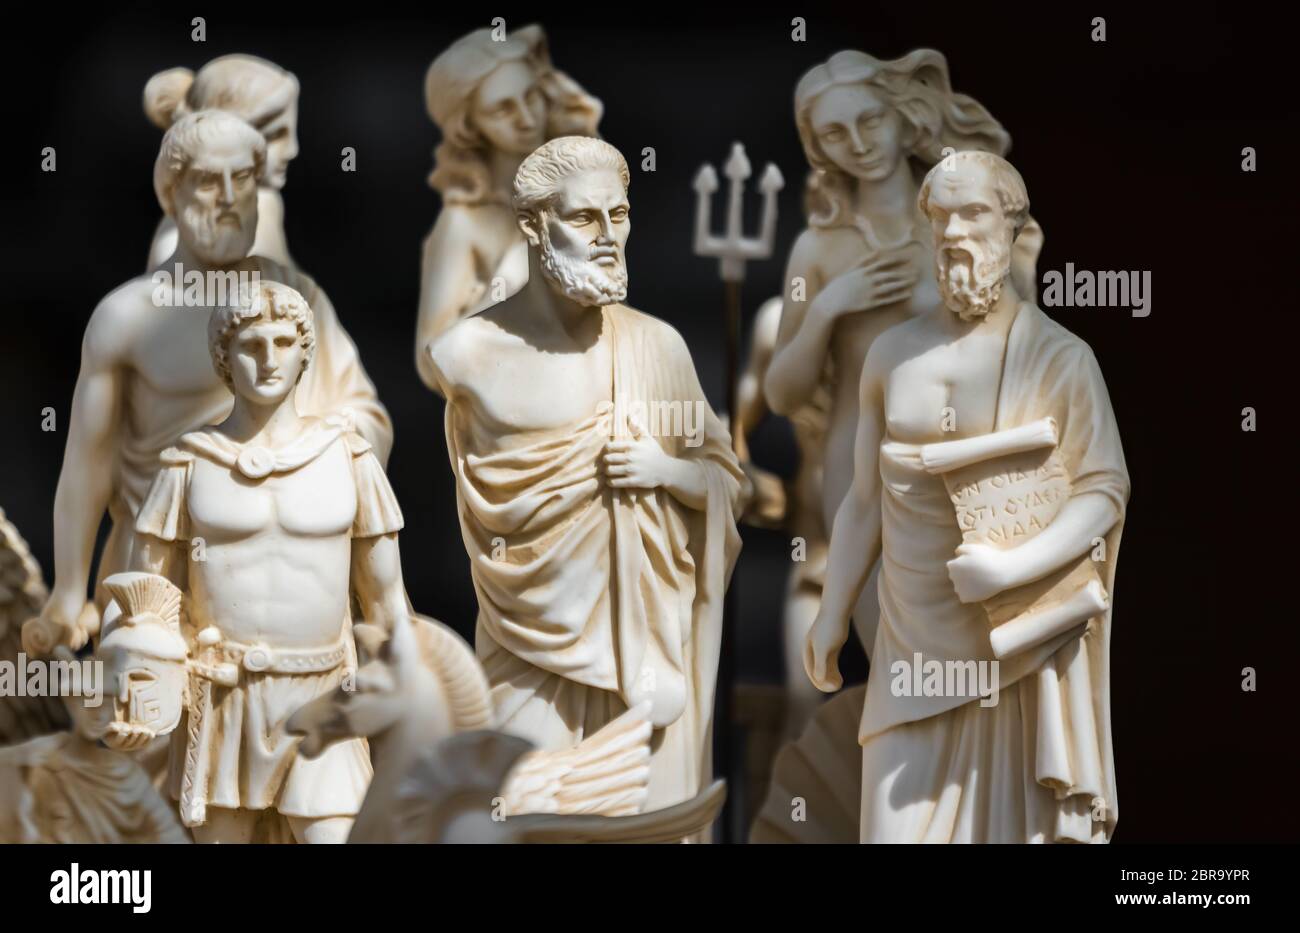 Small statuettes resembling people from ancient Rome and Greece on sale on a souvenir stand, Greece Stock Photo